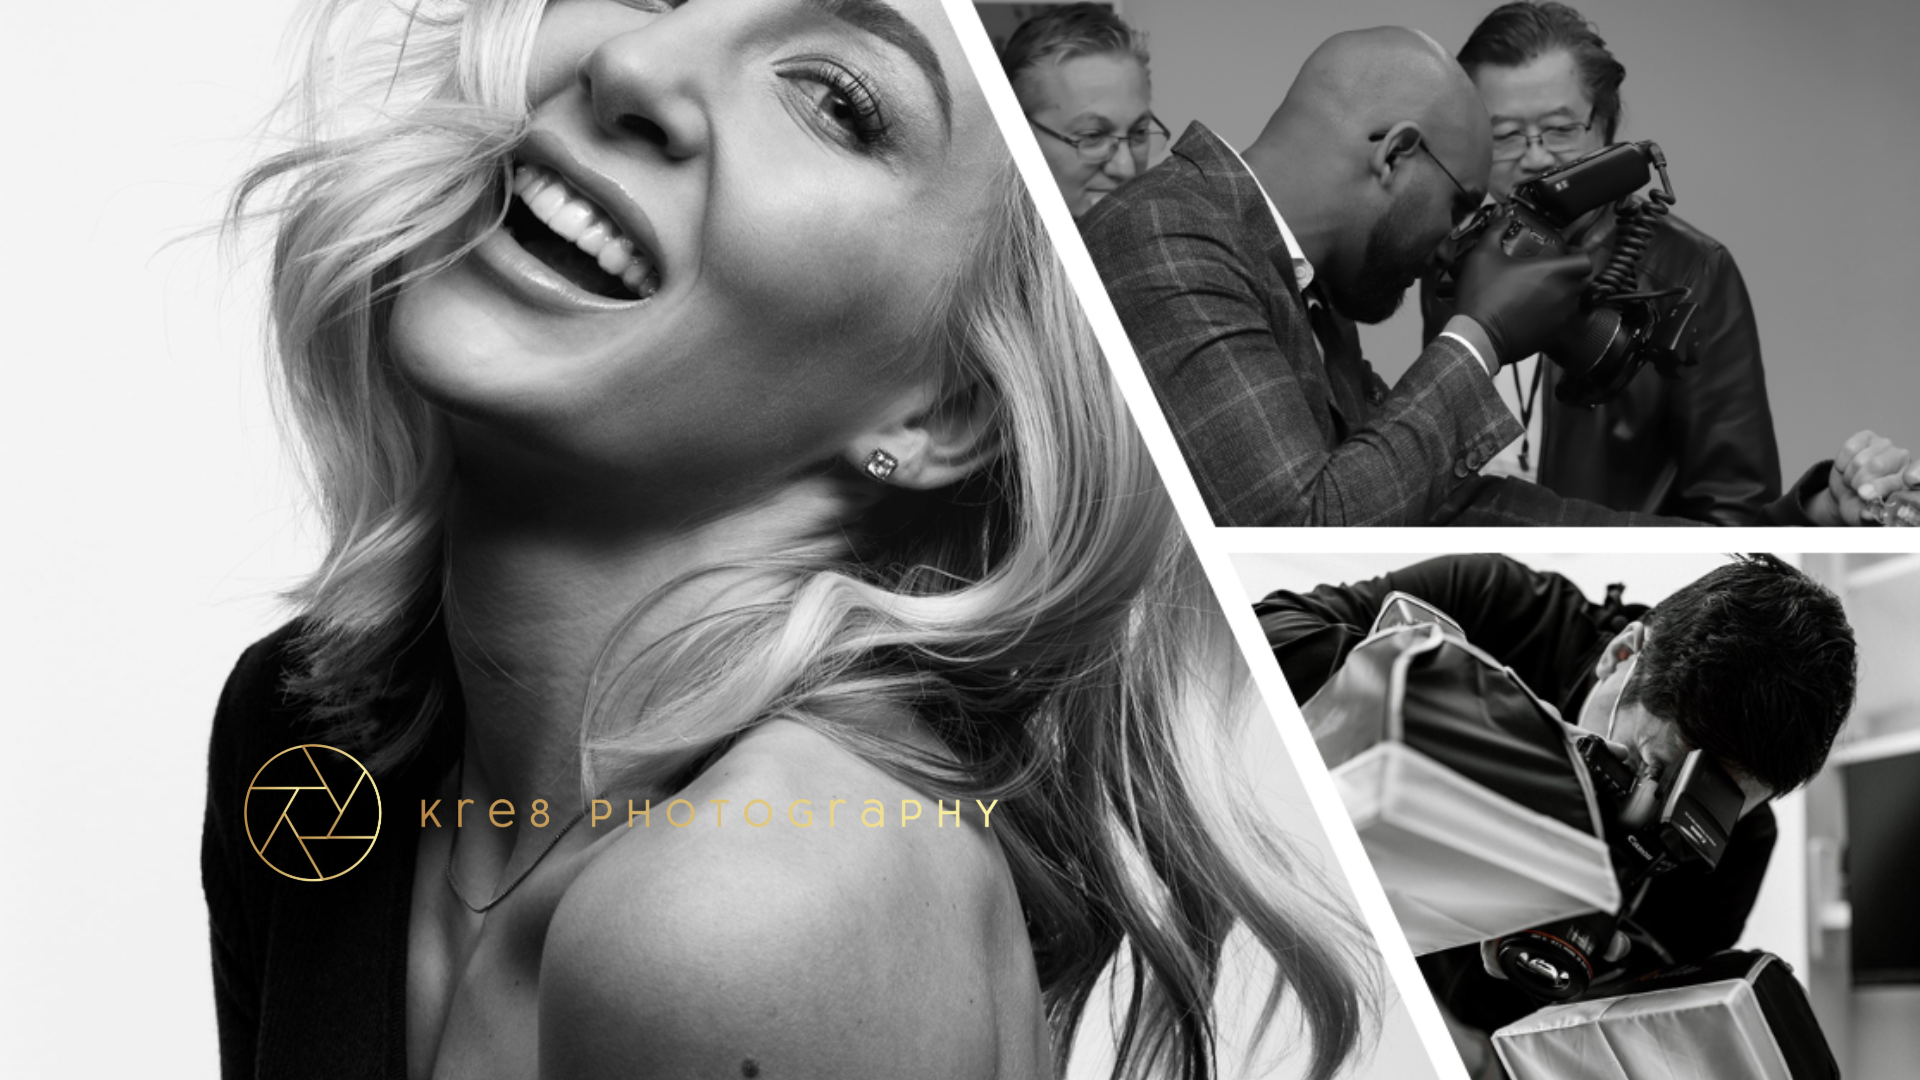 Kre8 Photography - Bring Life To Your Dentistry Through Photography